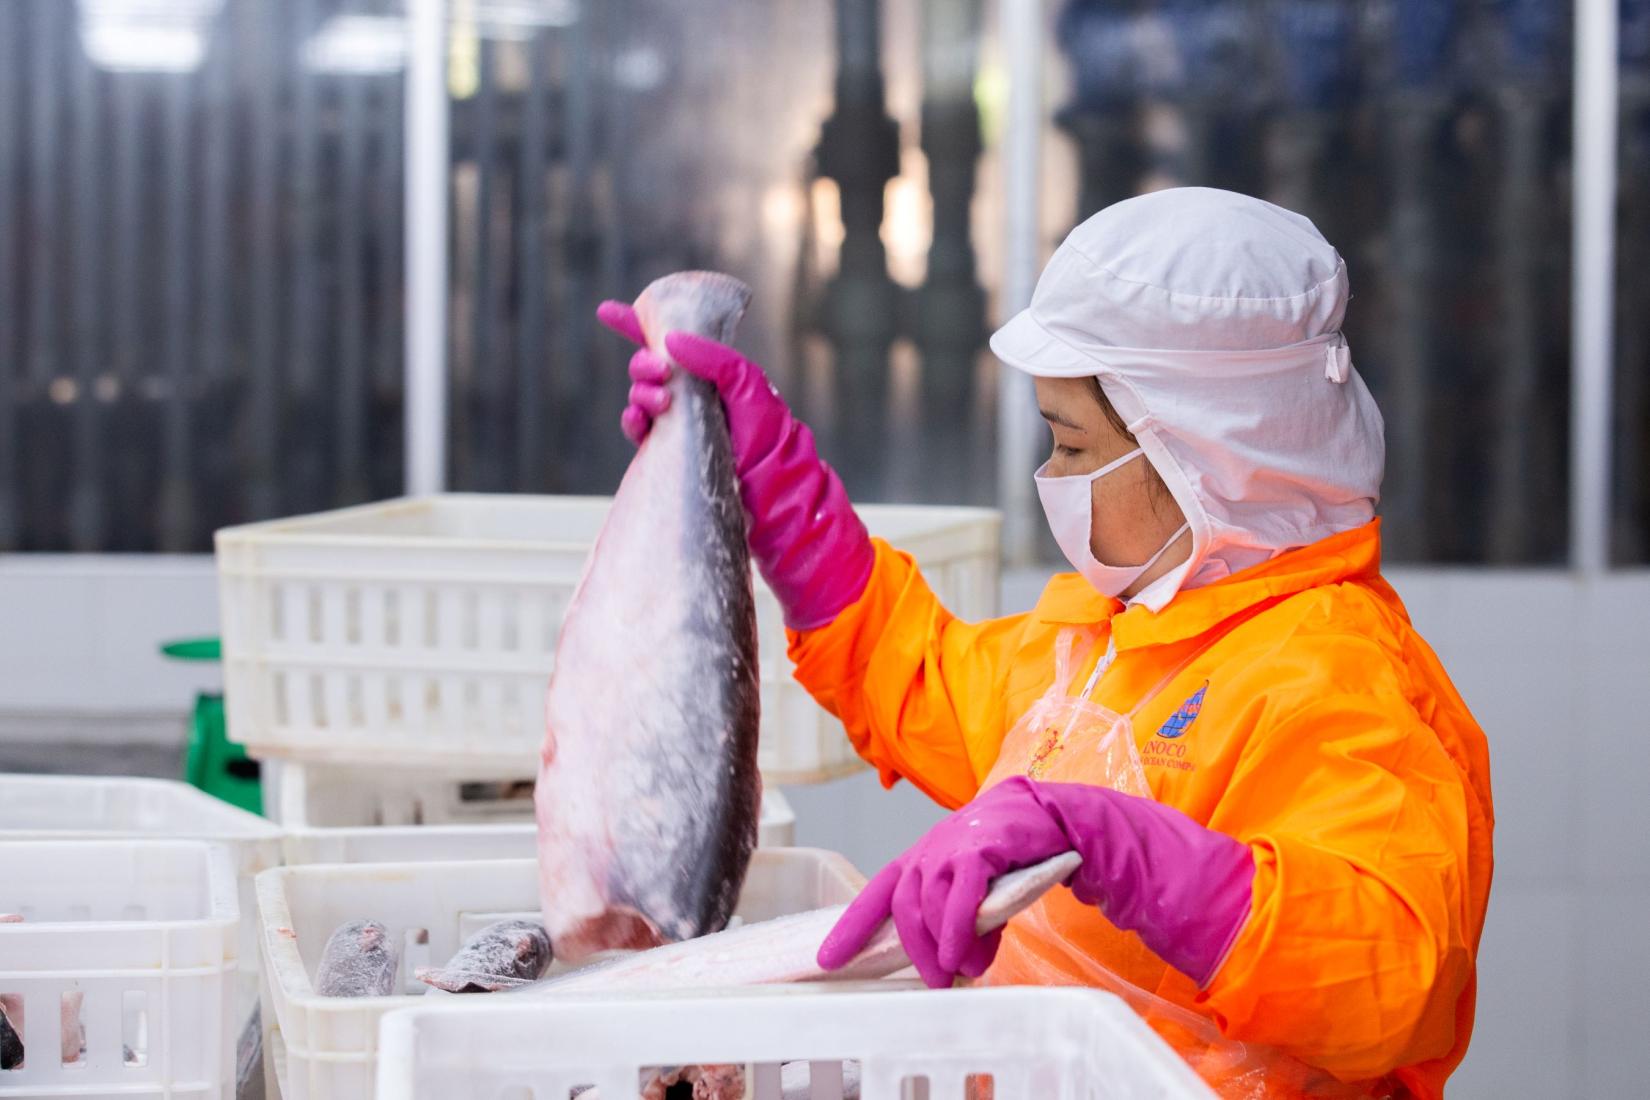 Person with projective gear including orange jumpsuit, pink gloves, hat and mask inpecting catfish in tubs